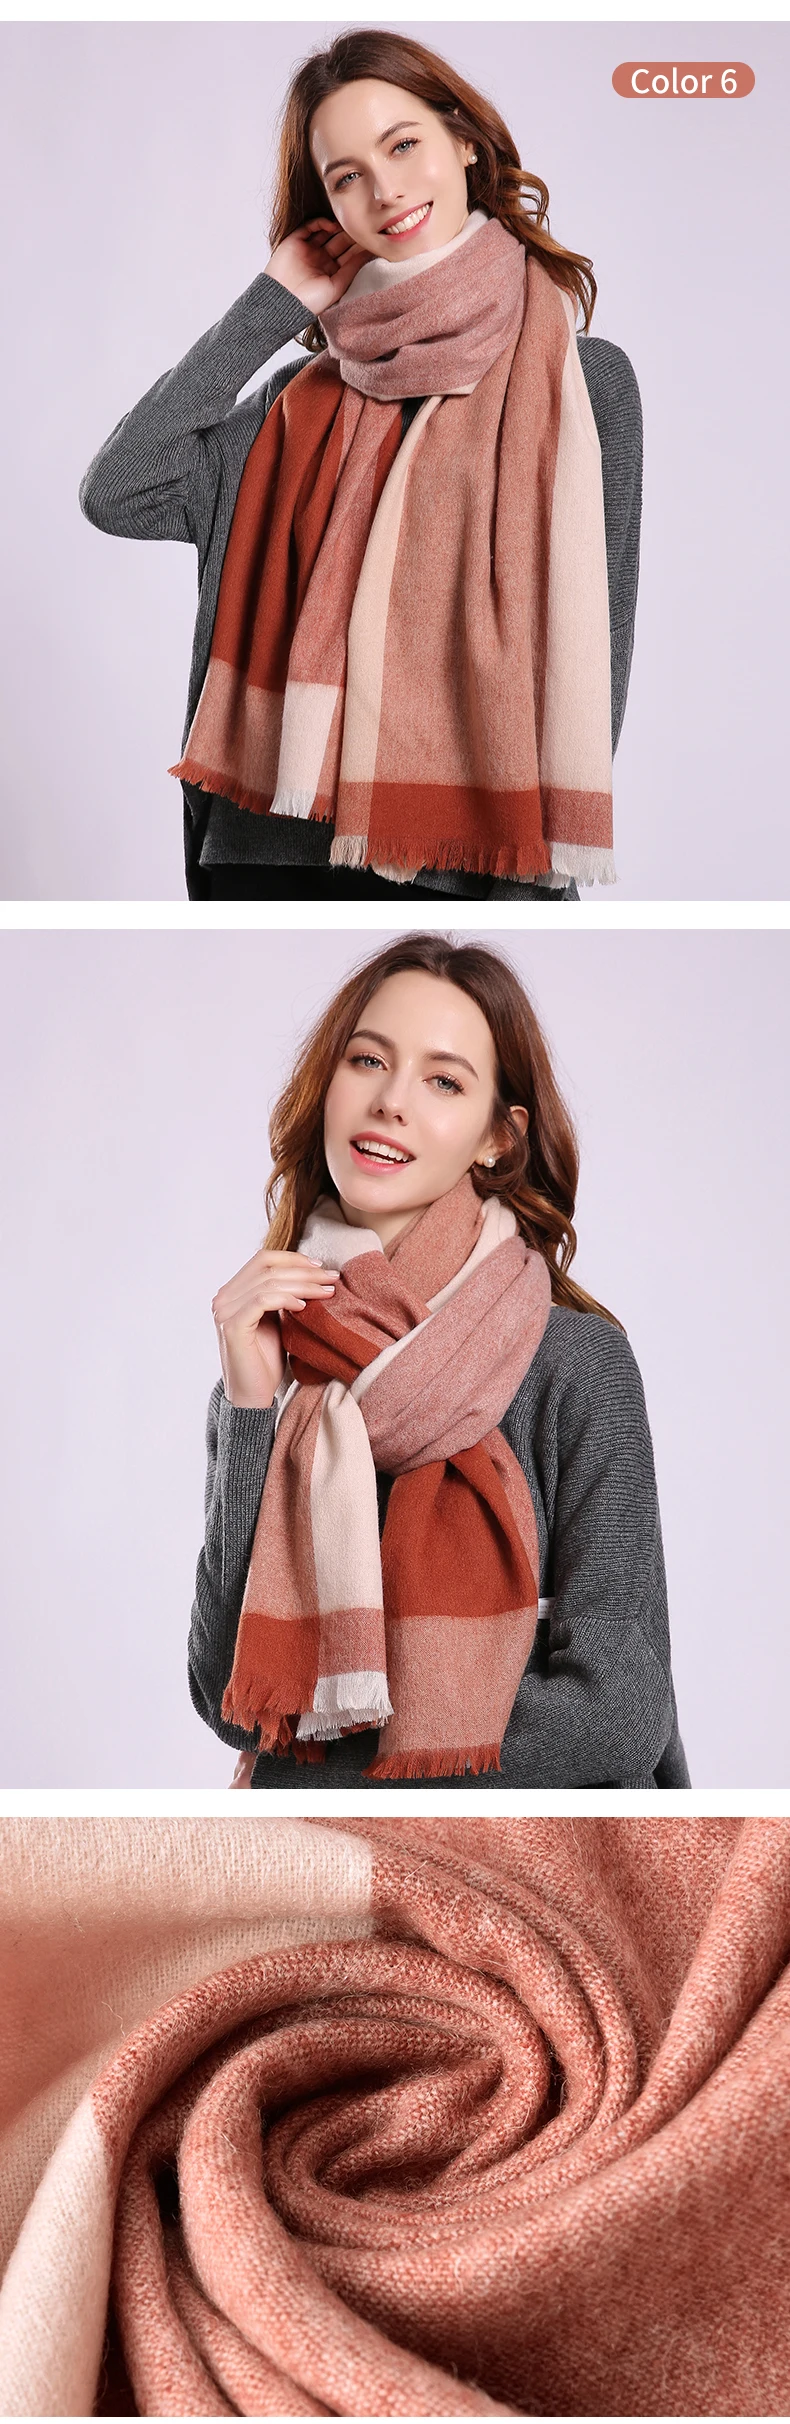 Winter Wool Scarf Women Plaid Shawls and Wraps for Ladies Pashmina Foulard Femme Warm Cashmere Echarpe Pure Wool Scarves